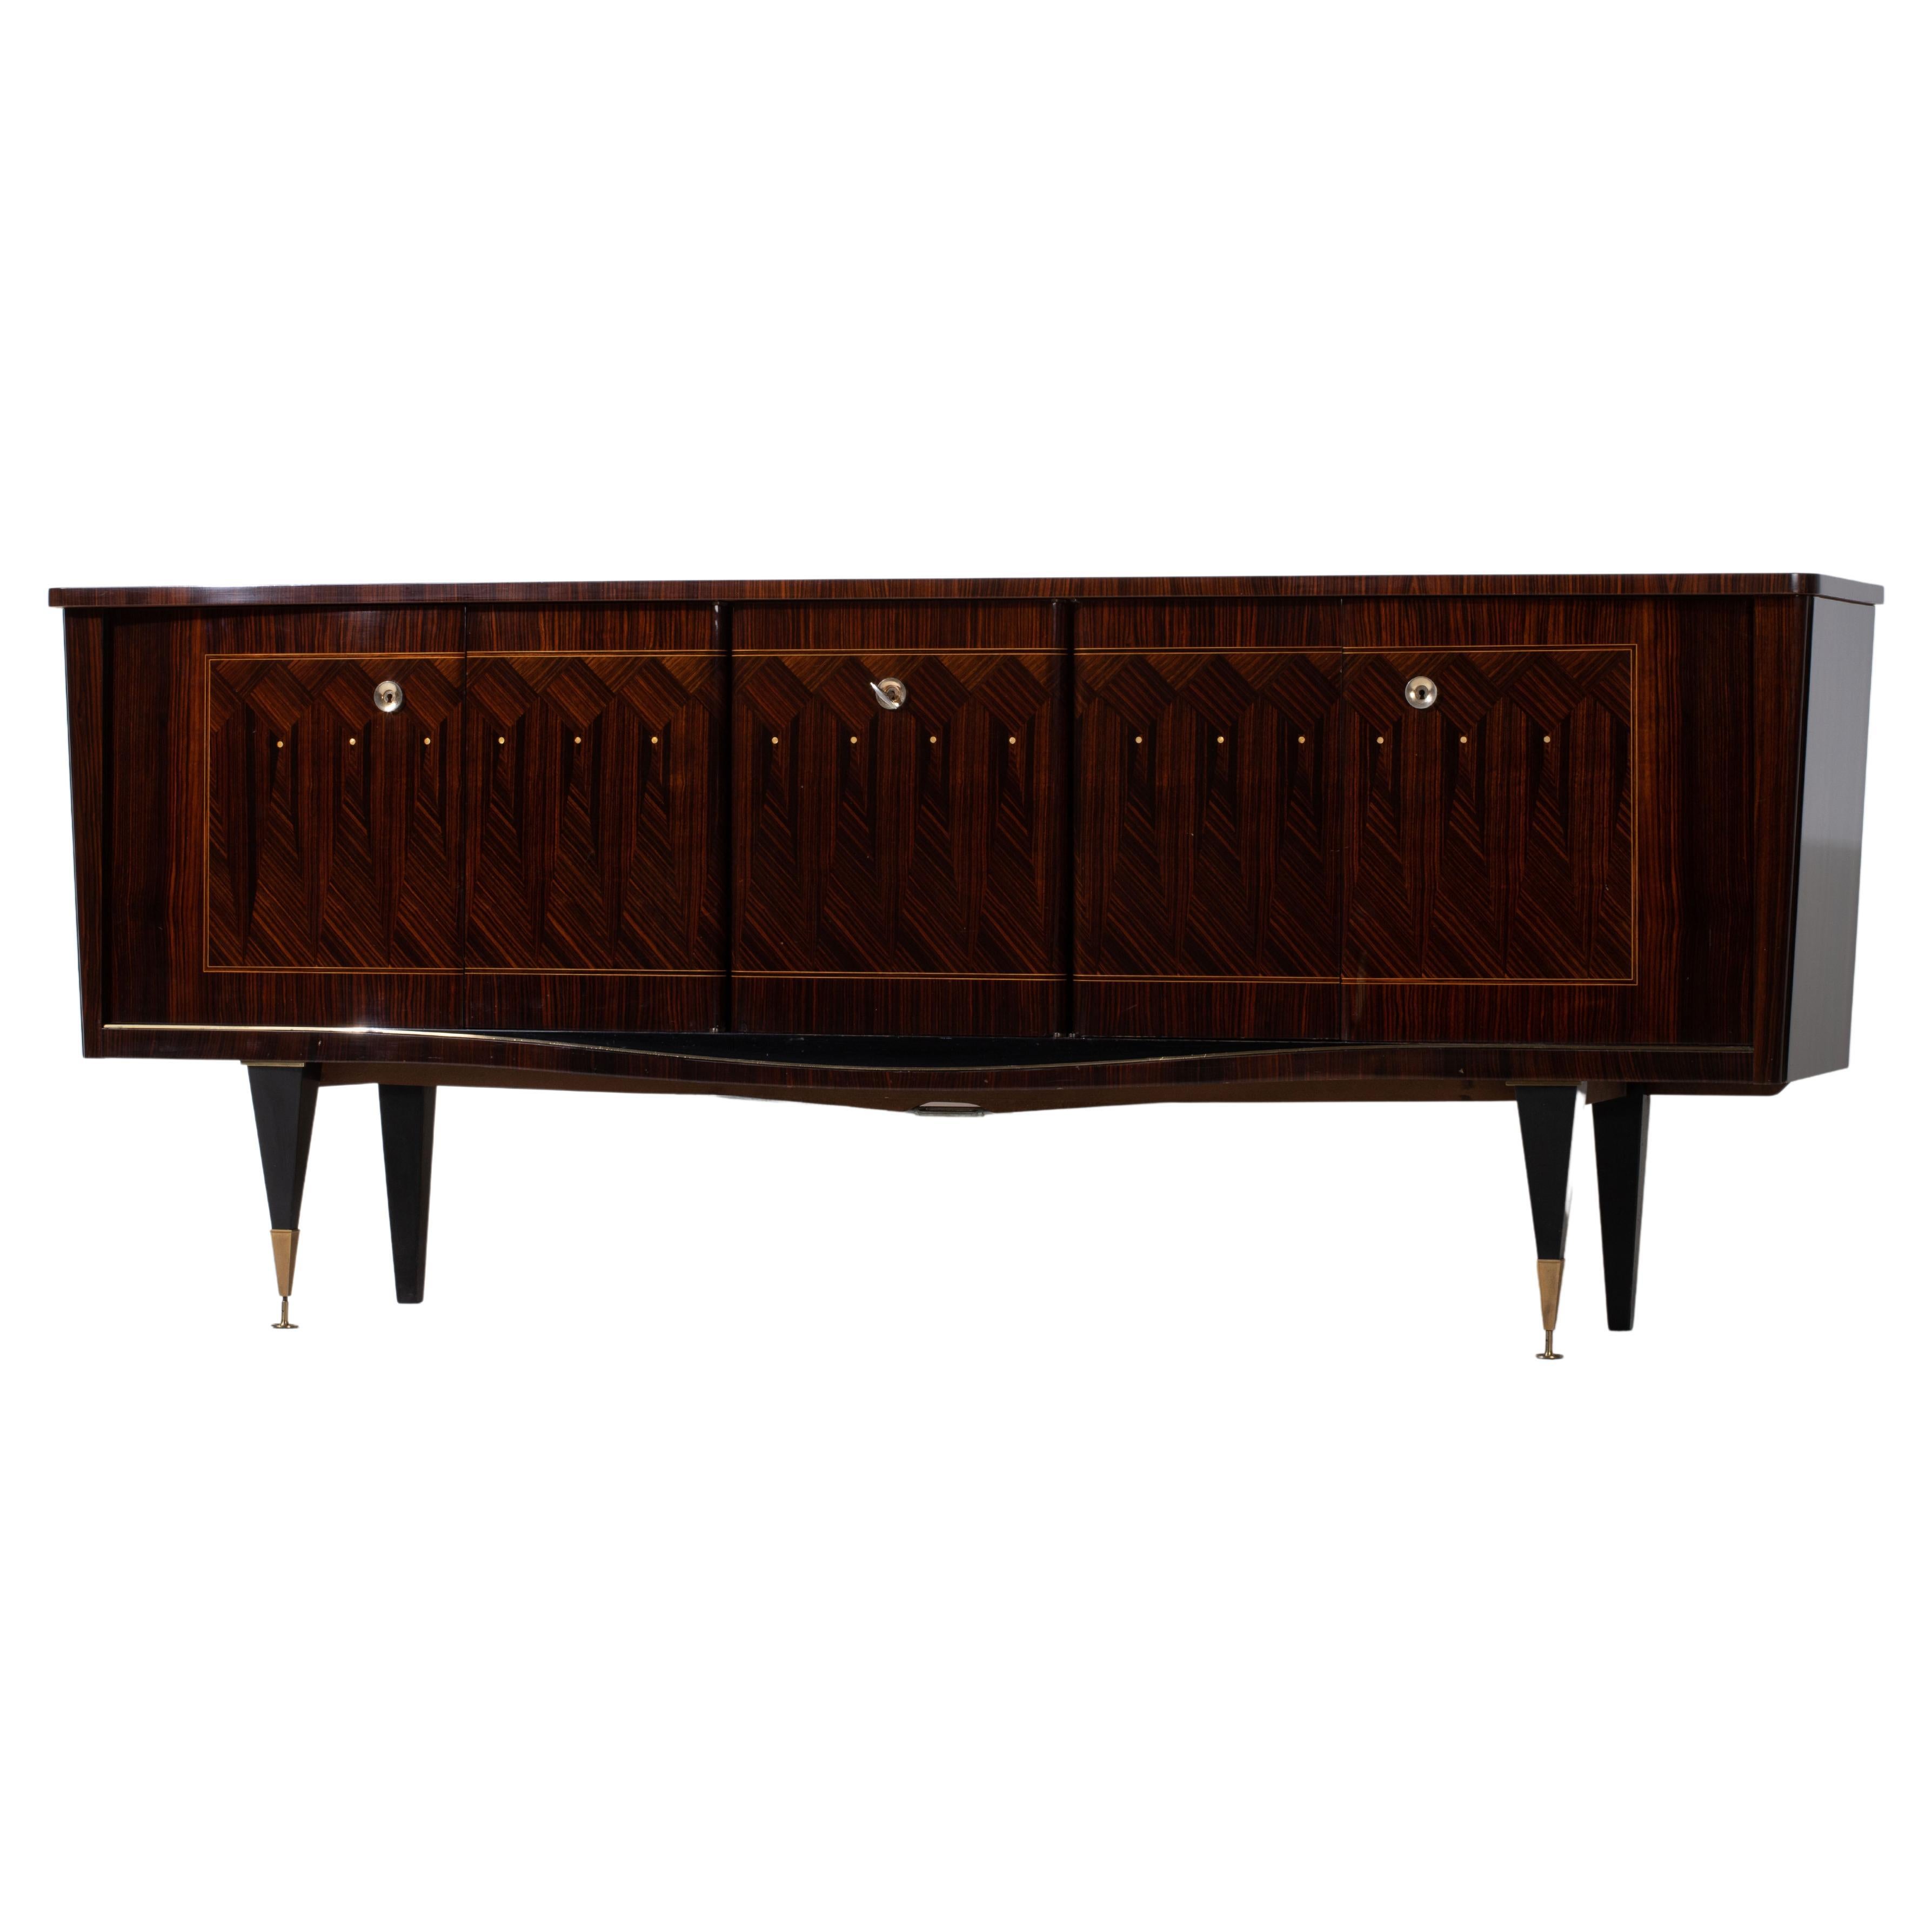 French Art Deco sideboard, credenza, with bar cabinet. 
The sideboard features stunning Macassar wood grain and rich pattern, mother of pearl. It offers ample storage, with shelves.
The case rests on tall tapered legs with brass details. 
A unique